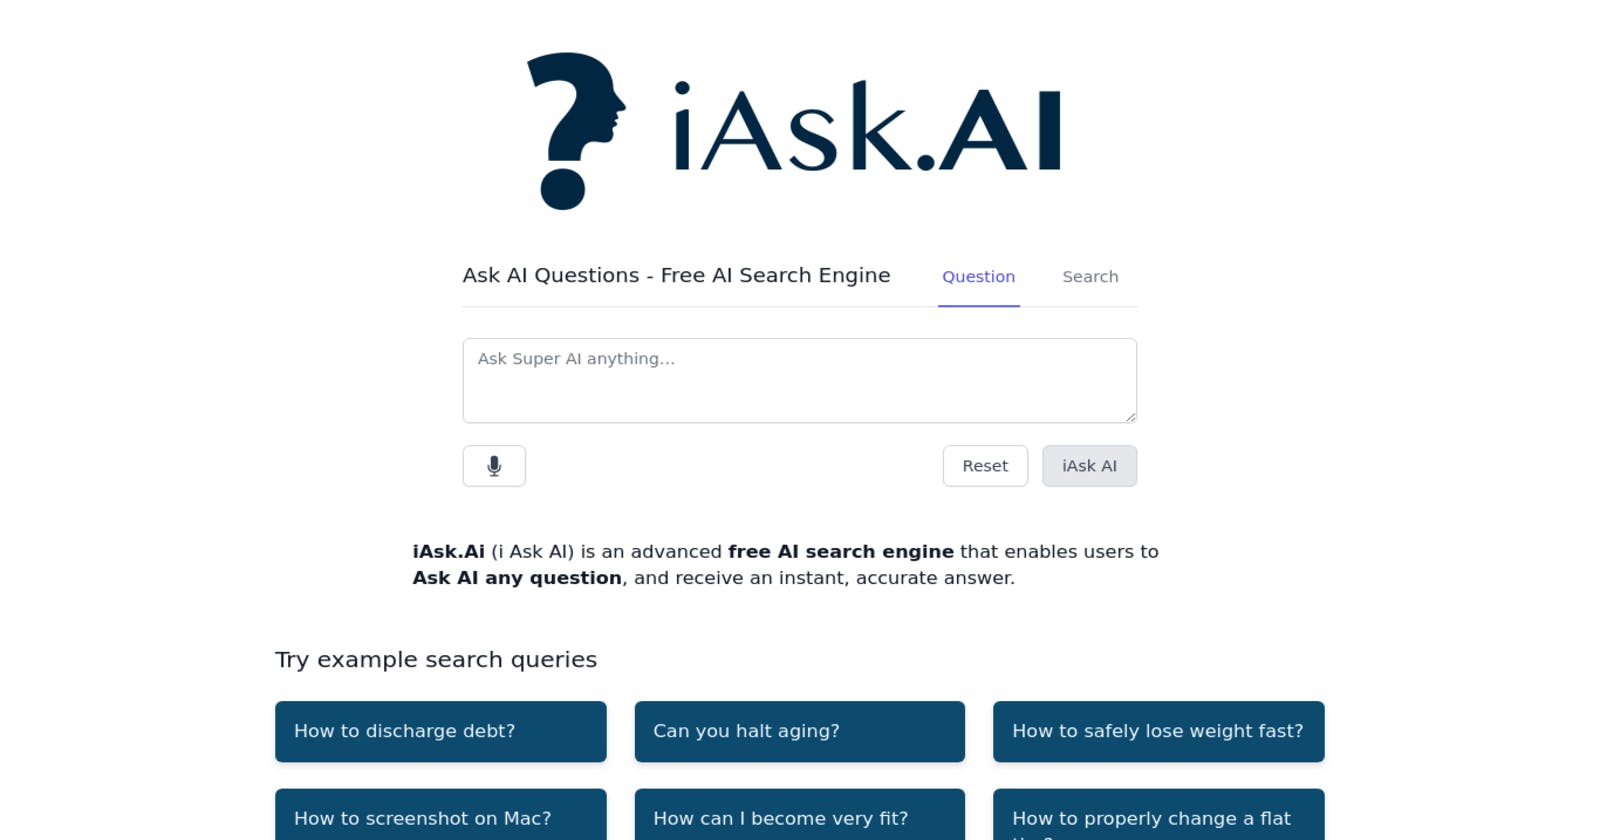 iAsk.AI: Your Free AI-Powered Search Engine for Instant, Accurate Answers